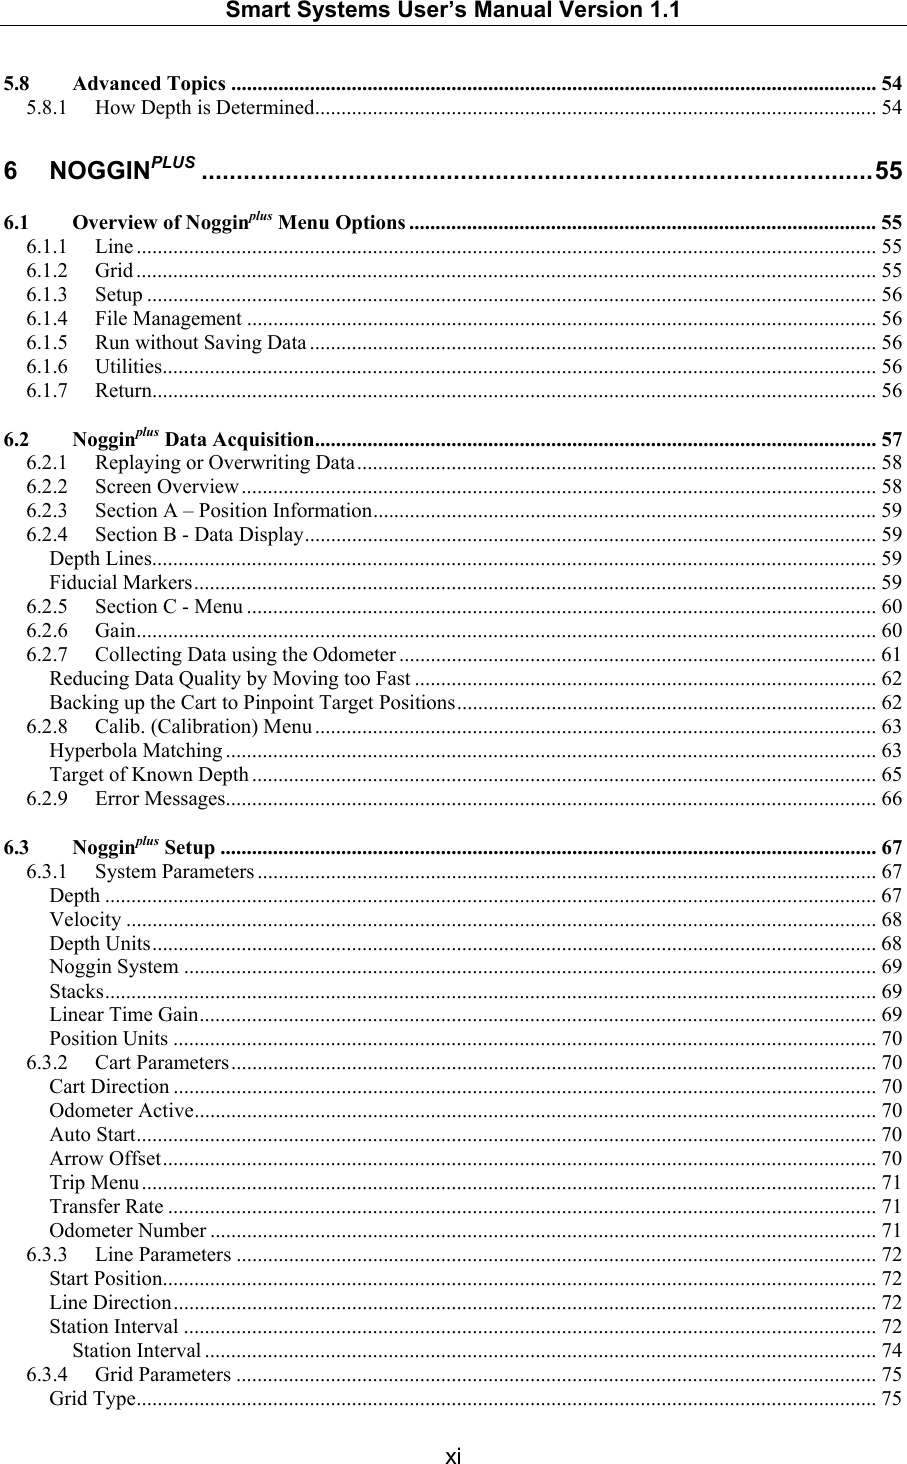   Smart Systems User’s Manual Version 1.1  xi  5.8 Advanced Topics ........................................................................................................................... 54 5.8.1 How Depth is Determined........................................................................................................... 54 6 NOGGINPLUS ................................................................................................55 6.1 Overview of Nogginplus Menu Options ......................................................................................... 55 6.1.1 Line ............................................................................................................................................. 55 6.1.2 Grid ............................................................................................................................................. 55 6.1.3 Setup ........................................................................................................................................... 56 6.1.4 File Management ........................................................................................................................ 56 6.1.5 Run without Saving Data ............................................................................................................ 56 6.1.6 Utilities........................................................................................................................................ 56 6.1.7 Return.......................................................................................................................................... 56 6.2 Nogginplus Data Acquisition........................................................................................................... 57 6.2.1 Replaying or Overwriting Data...................................................................................................58 6.2.2 Screen Overview......................................................................................................................... 58 6.2.3 Section A – Position Information................................................................................................59 6.2.4 Section B - Data Display............................................................................................................. 59 Depth Lines.......................................................................................................................................... 59 Fiducial Markers.................................................................................................................................. 59 6.2.5 Section C - Menu ........................................................................................................................ 60 6.2.6 Gain............................................................................................................................................. 60 6.2.7 Collecting Data using the Odometer ........................................................................................... 61 Reducing Data Quality by Moving too Fast ........................................................................................62 Backing up the Cart to Pinpoint Target Positions................................................................................62 6.2.8 Calib. (Calibration) Menu ........................................................................................................... 63 Hyperbola Matching ............................................................................................................................ 63 Target of Known Depth ....................................................................................................................... 65 6.2.9 Error Messages............................................................................................................................ 66 6.3 Nogginplus Setup ............................................................................................................................. 67 6.3.1 System Parameters ...................................................................................................................... 67 Depth ................................................................................................................................................... 67 Velocity ............................................................................................................................................... 68 Depth Units.......................................................................................................................................... 68 Noggin System .................................................................................................................................... 69 Stacks................................................................................................................................................... 69 Linear Time Gain................................................................................................................................. 69 Position Units ...................................................................................................................................... 70 6.3.2 Cart Parameters........................................................................................................................... 70 Cart Direction ...................................................................................................................................... 70 Odometer Active.................................................................................................................................. 70 Auto Start............................................................................................................................................. 70 Arrow Offset........................................................................................................................................ 70 Trip Menu ............................................................................................................................................ 71 Transfer Rate ....................................................................................................................................... 71 Odometer Number ............................................................................................................................... 71 6.3.3 Line Parameters .......................................................................................................................... 72 Start Position........................................................................................................................................ 72 Line Direction...................................................................................................................................... 72 Station Interval .................................................................................................................................... 72 Station Interval ................................................................................................................................ 74 6.3.4 Grid Parameters .......................................................................................................................... 75 Grid Type............................................................................................................................................. 75 